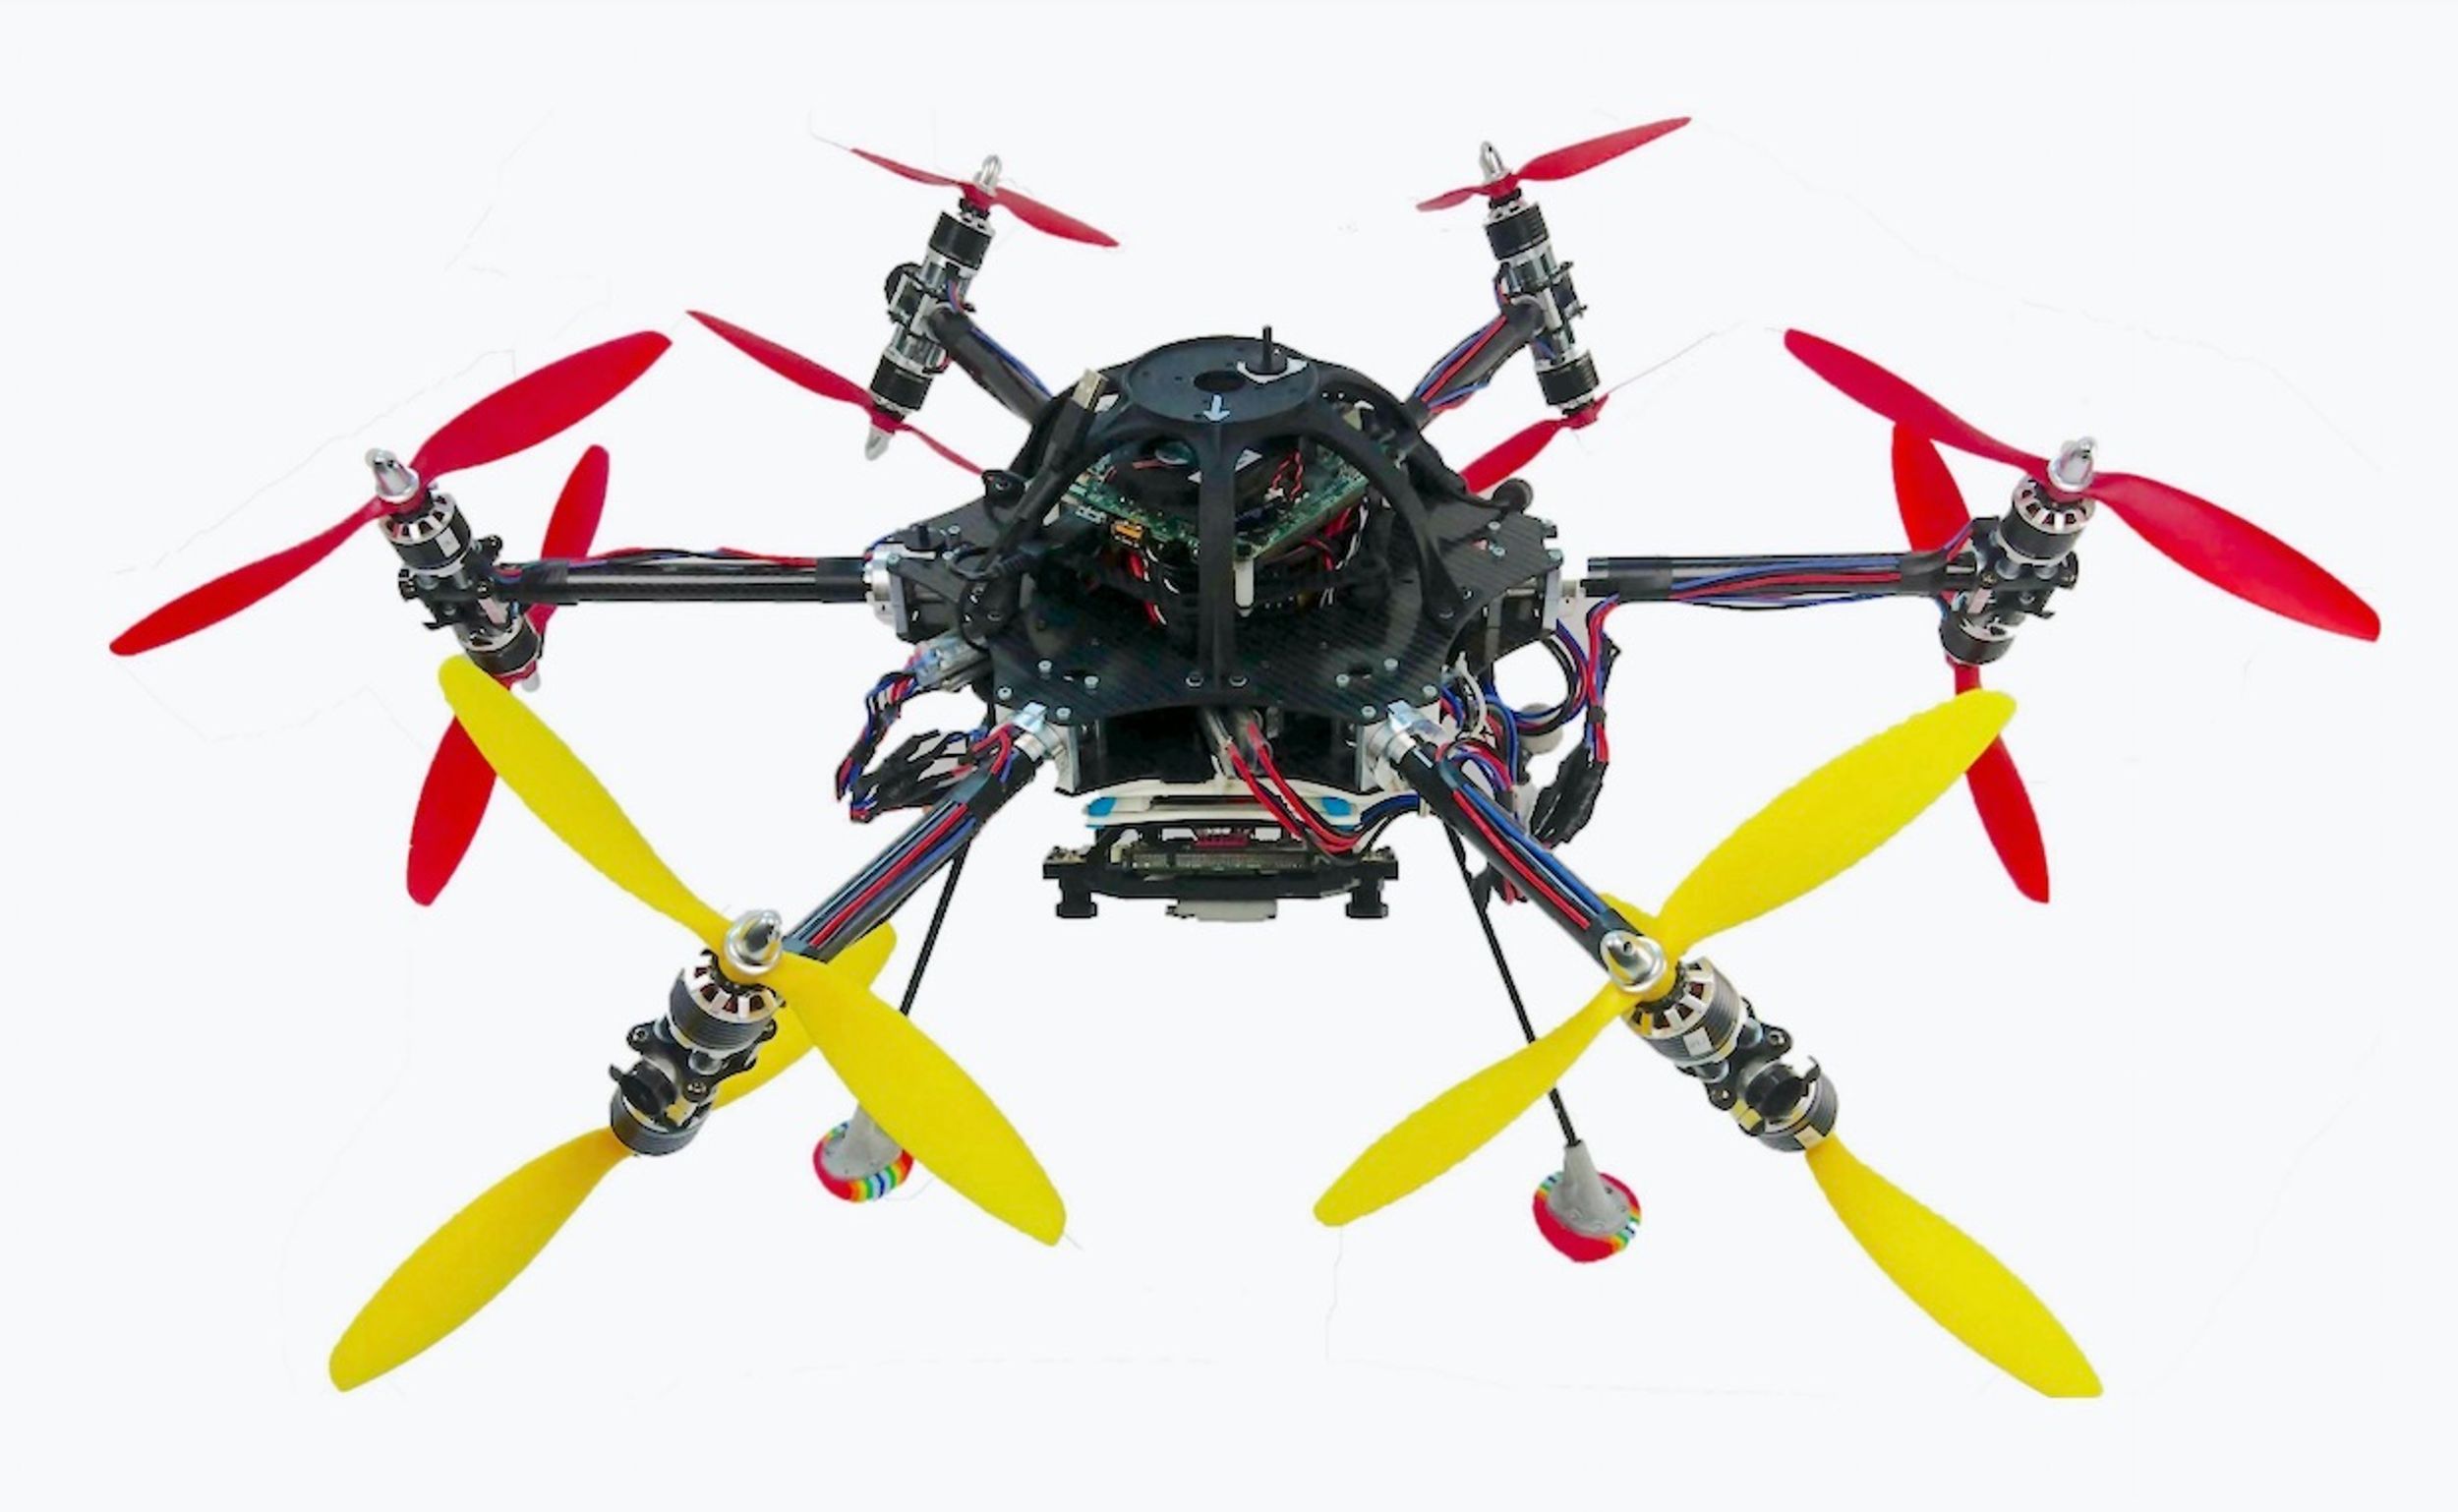 Omnidirectional Drone Uses 12 Tiltable Propellers to Fly